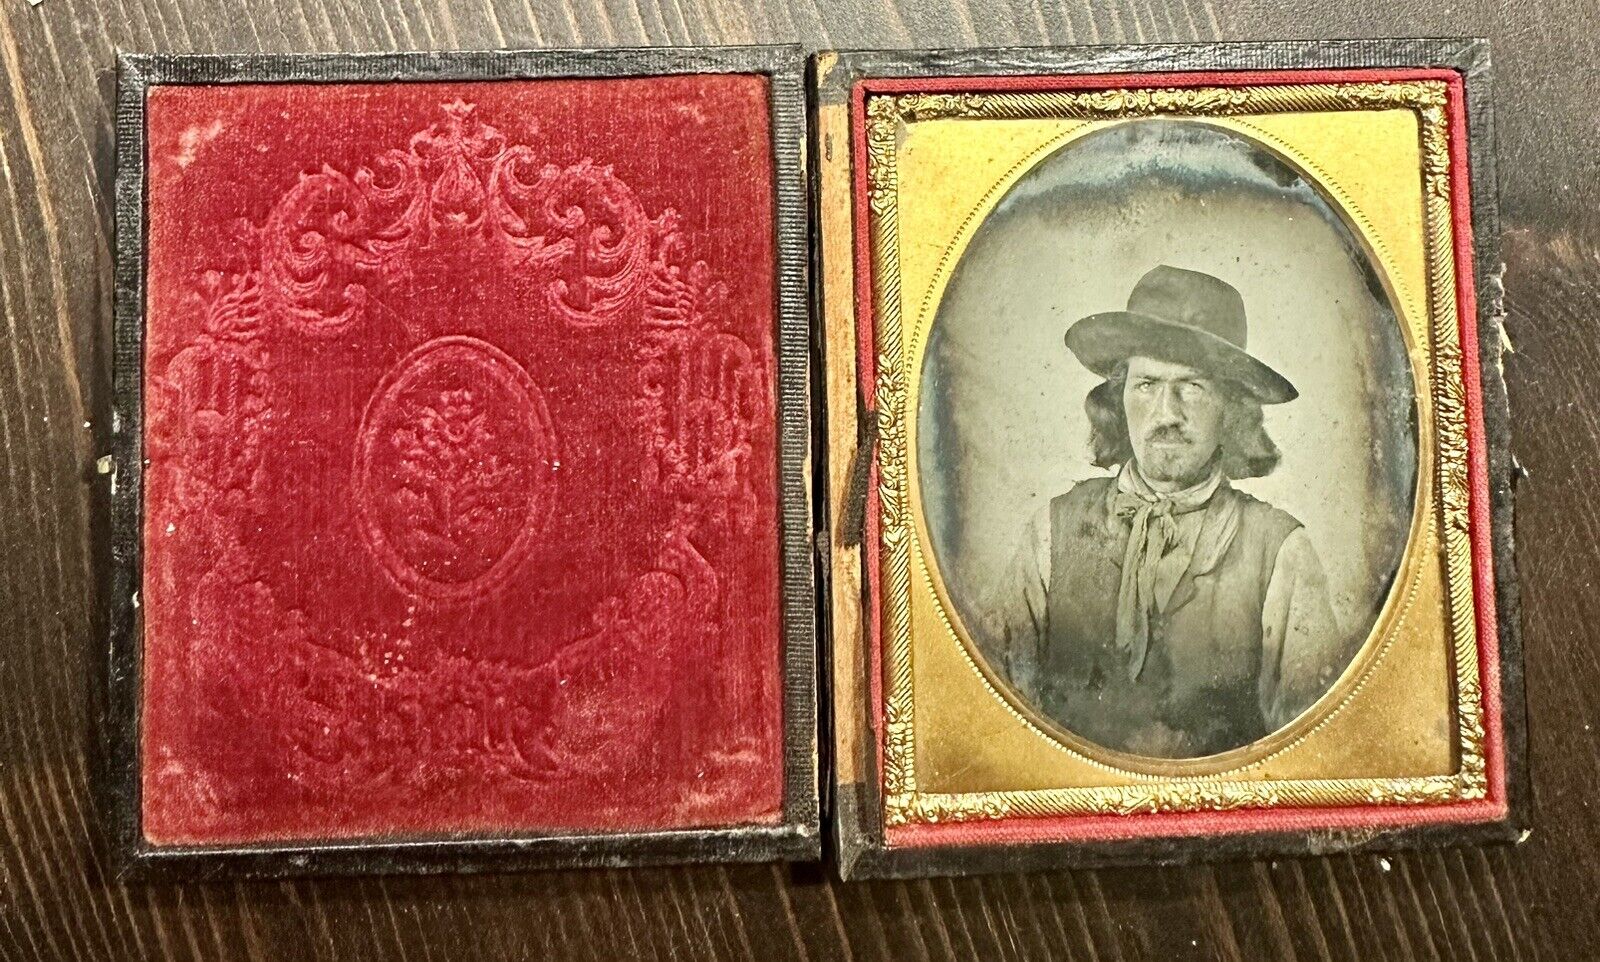 1850s Ambrotype of a Mean Looking Gold Rush Miner Found @ Gridley California